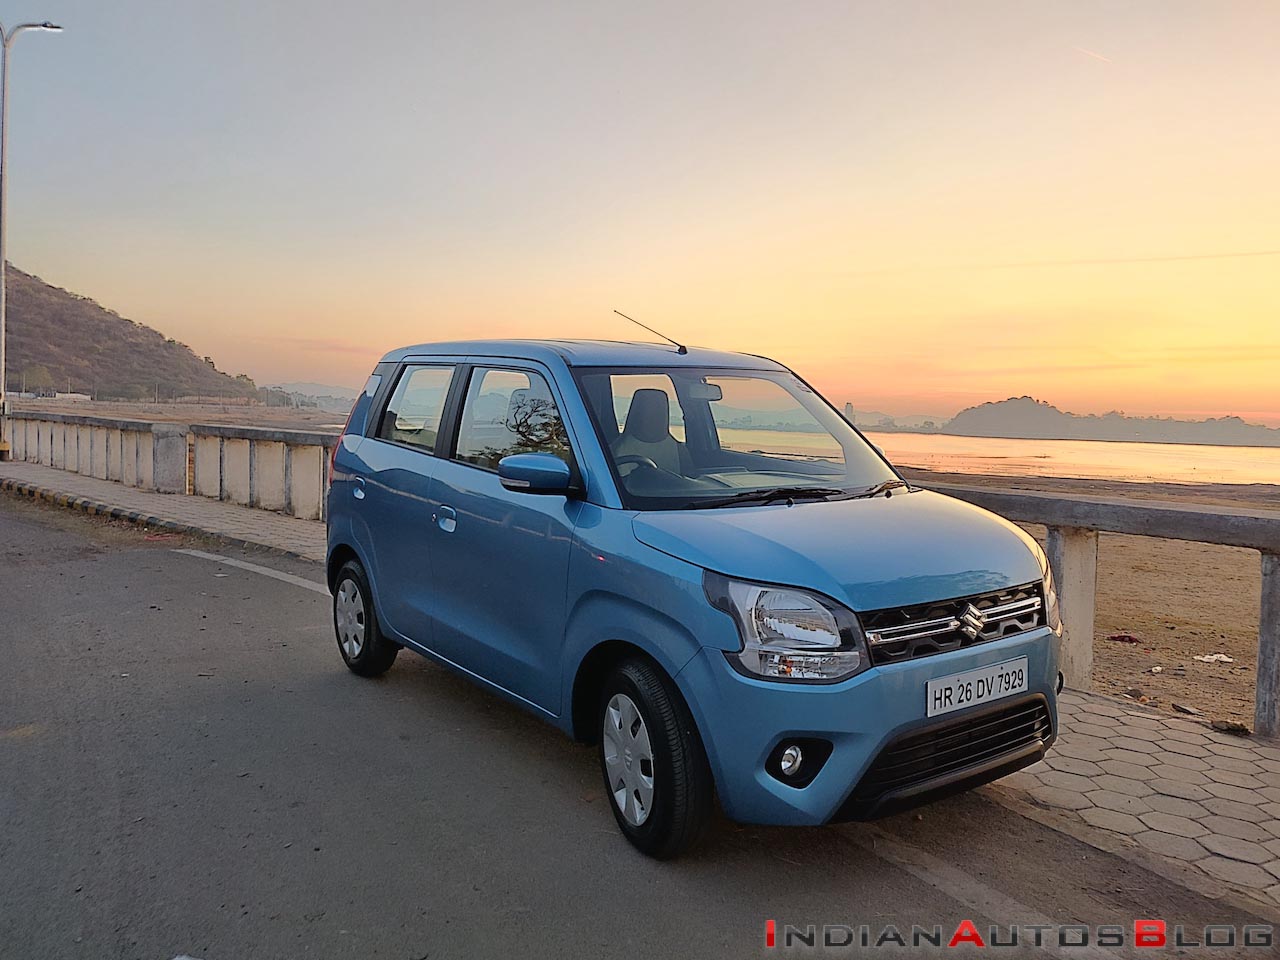 2019 Maruti Wagonr S Cng Launched Prices Start At Inr 4 84 Lakh